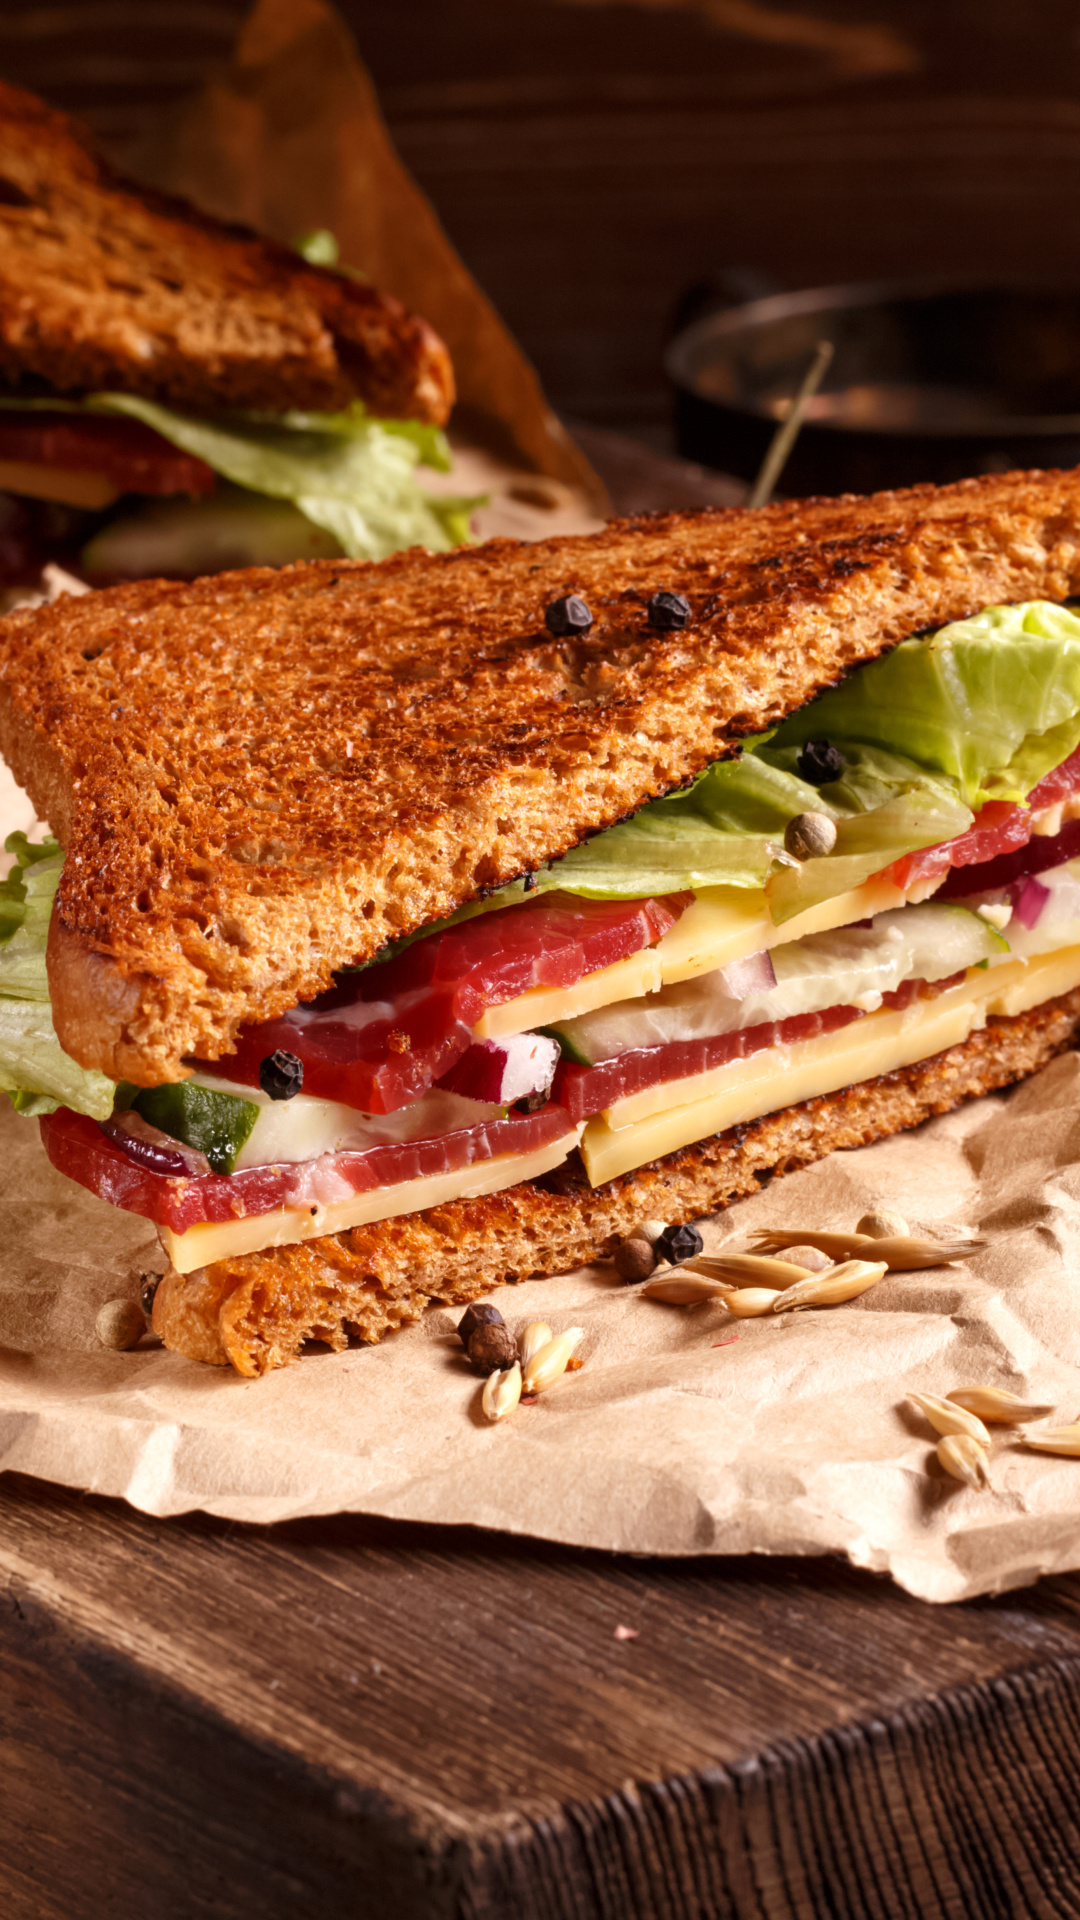 Sandwich: Customized to accommodate dietary restrictions and preferences. 1080x1920 Full HD Wallpaper.